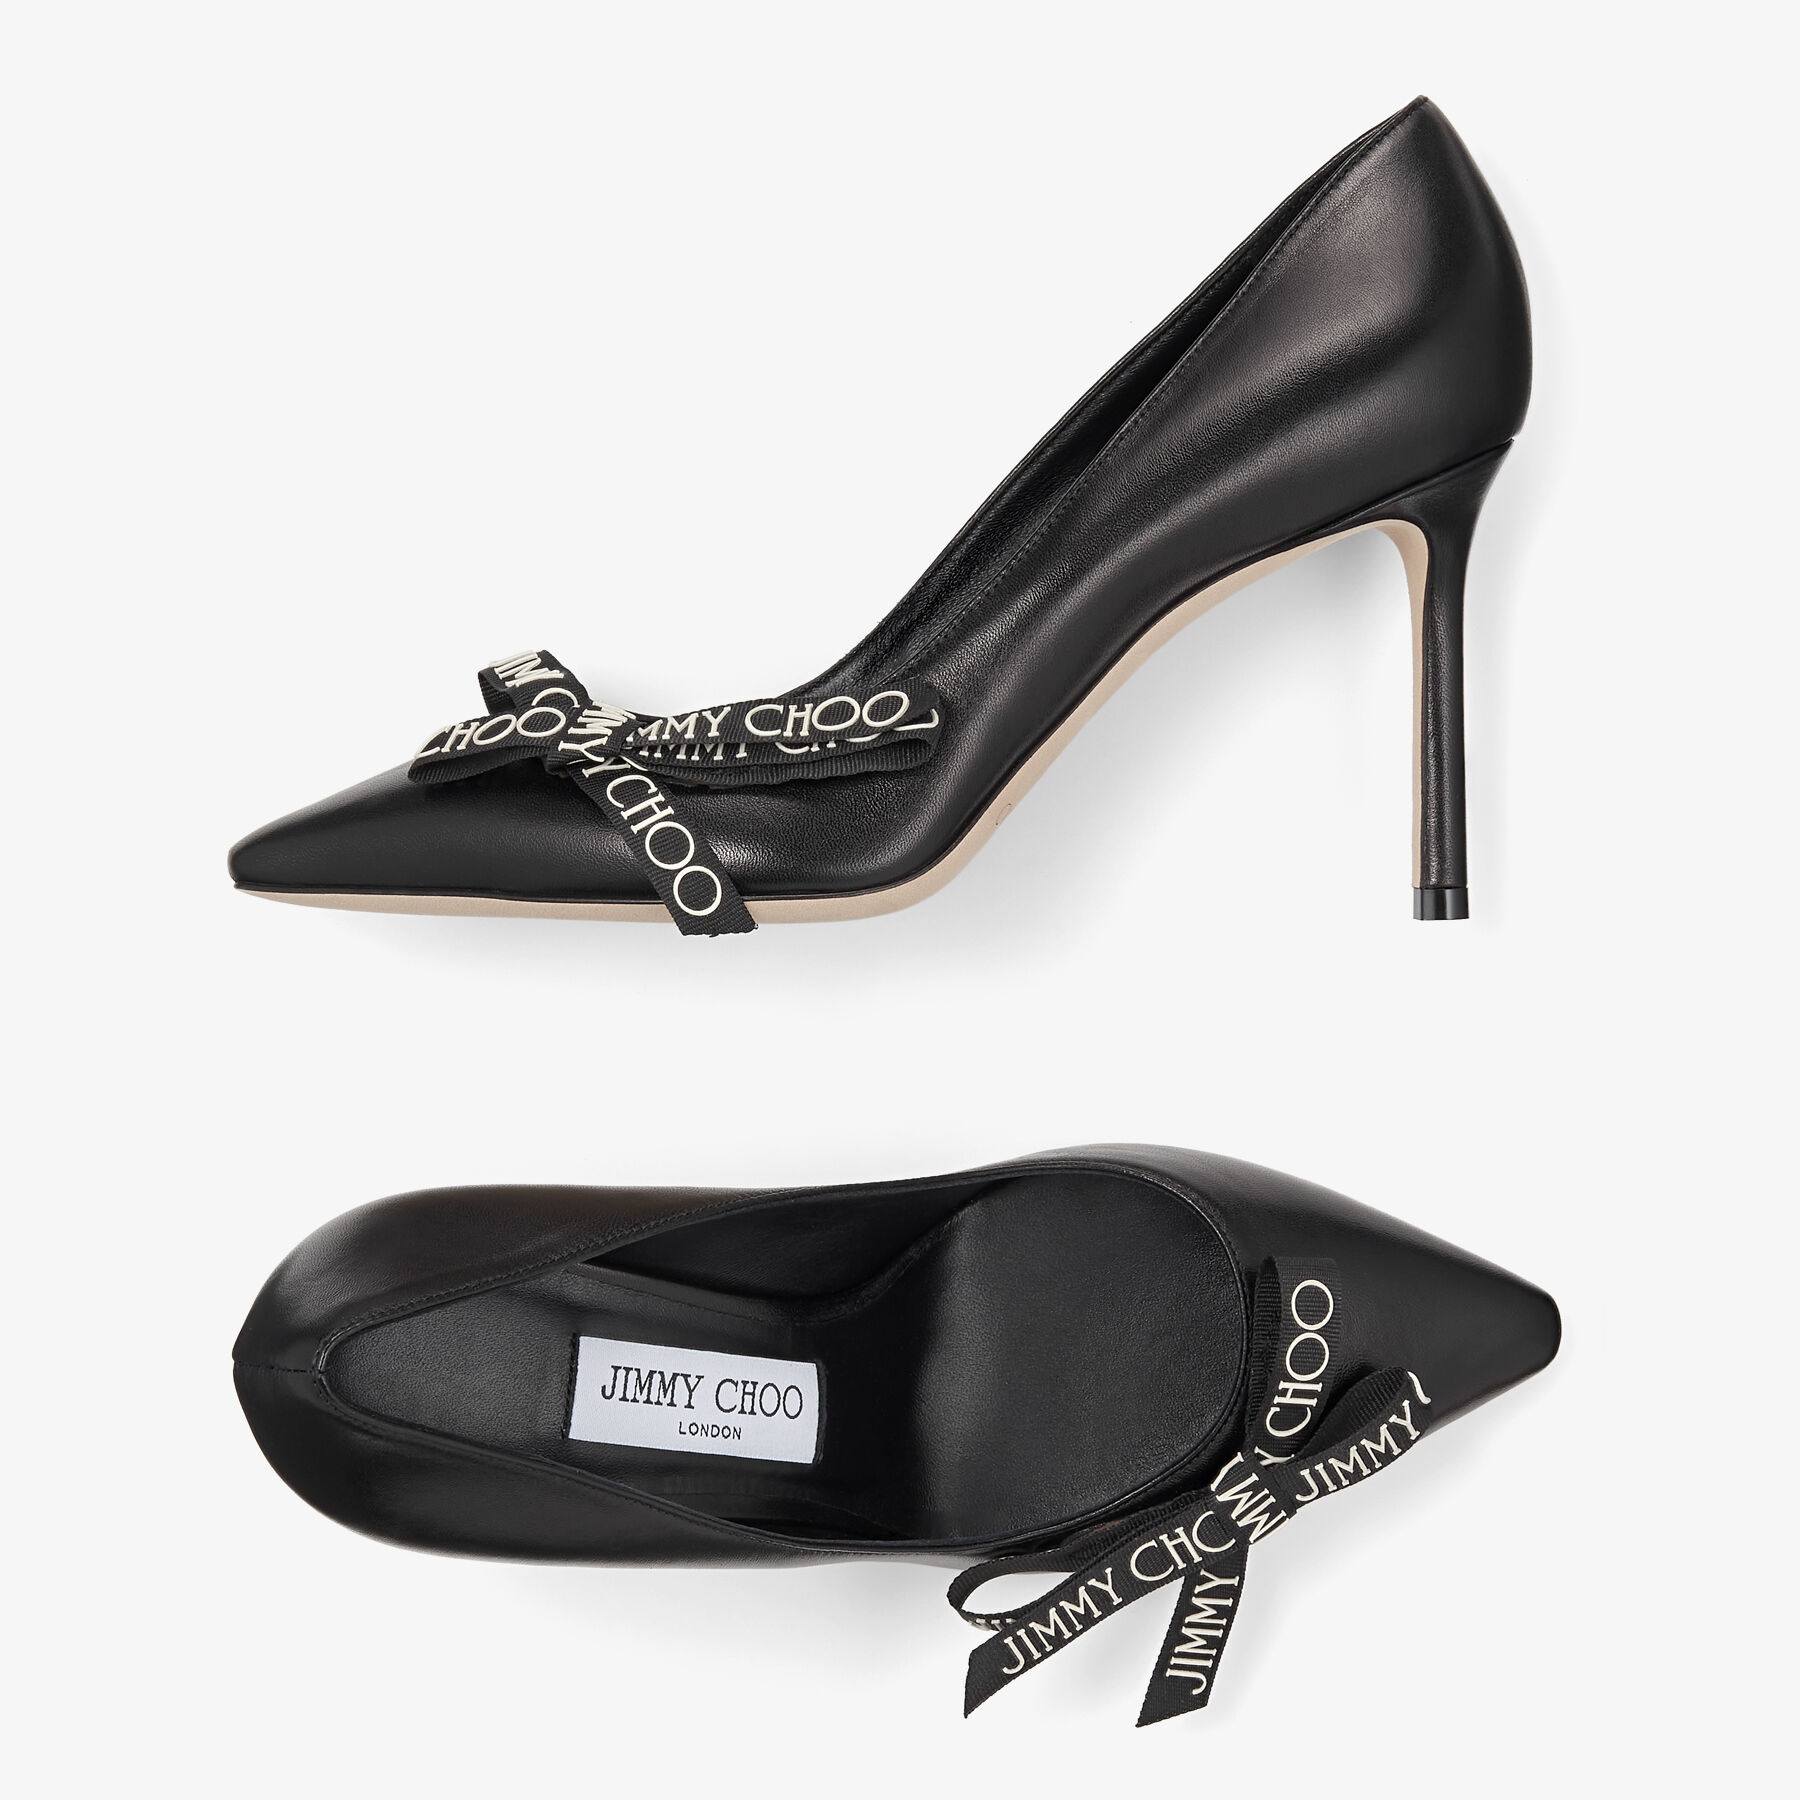 Romy 85
Black Nappa Leather Pumps with Jimmy Choo Bow - 5